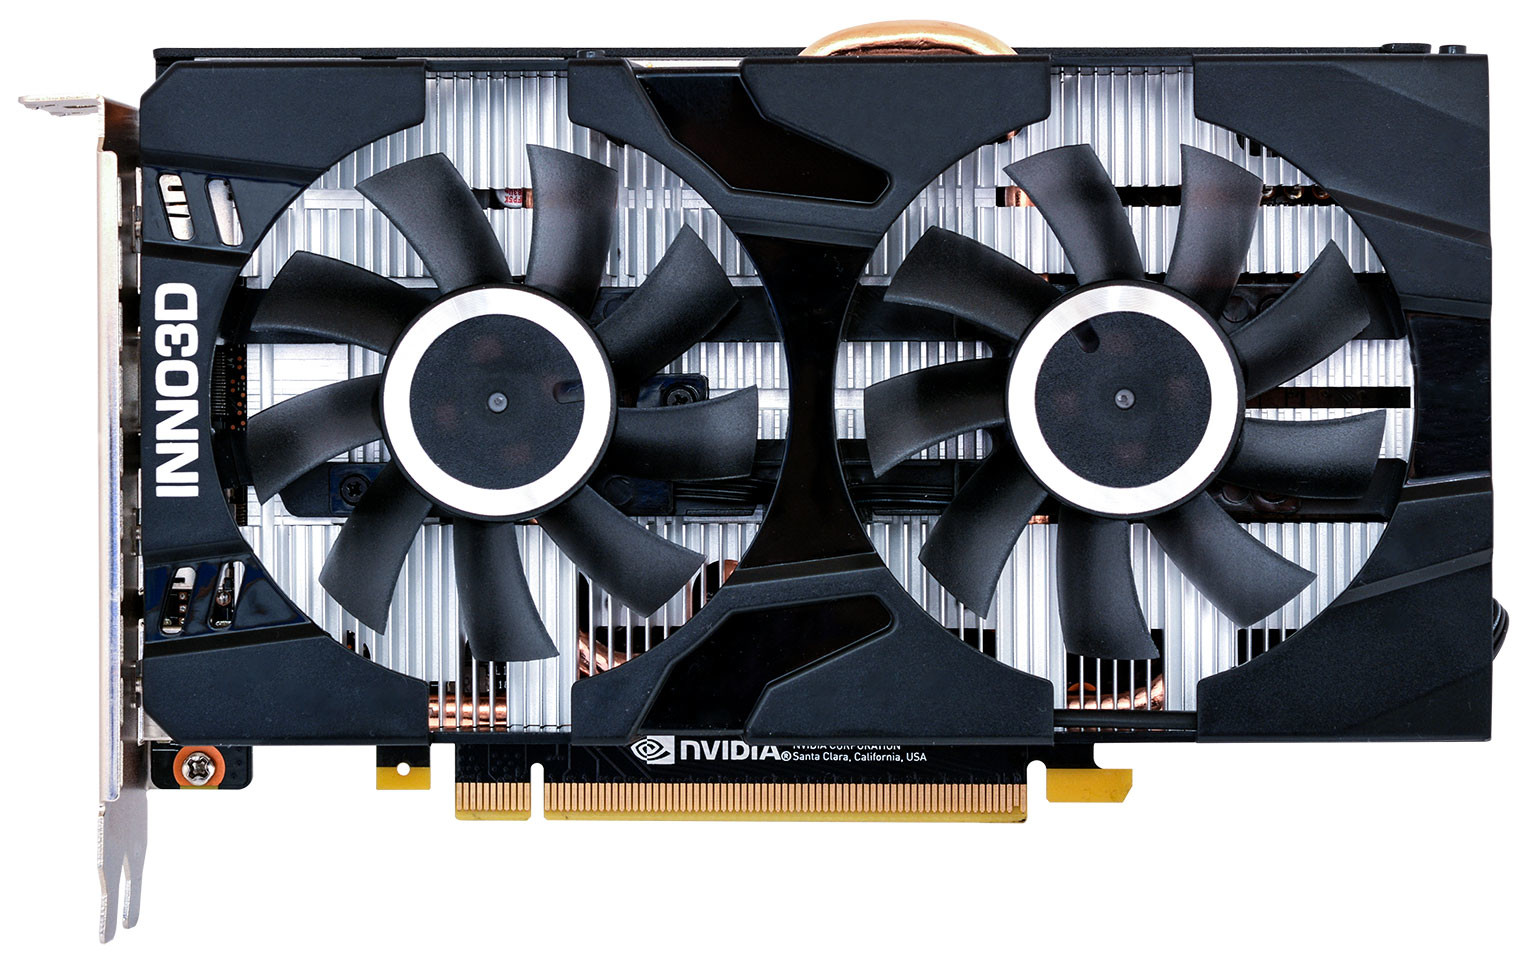 INNO3D Out the GTX 1660 Ti Twin X2 Graphics Card |